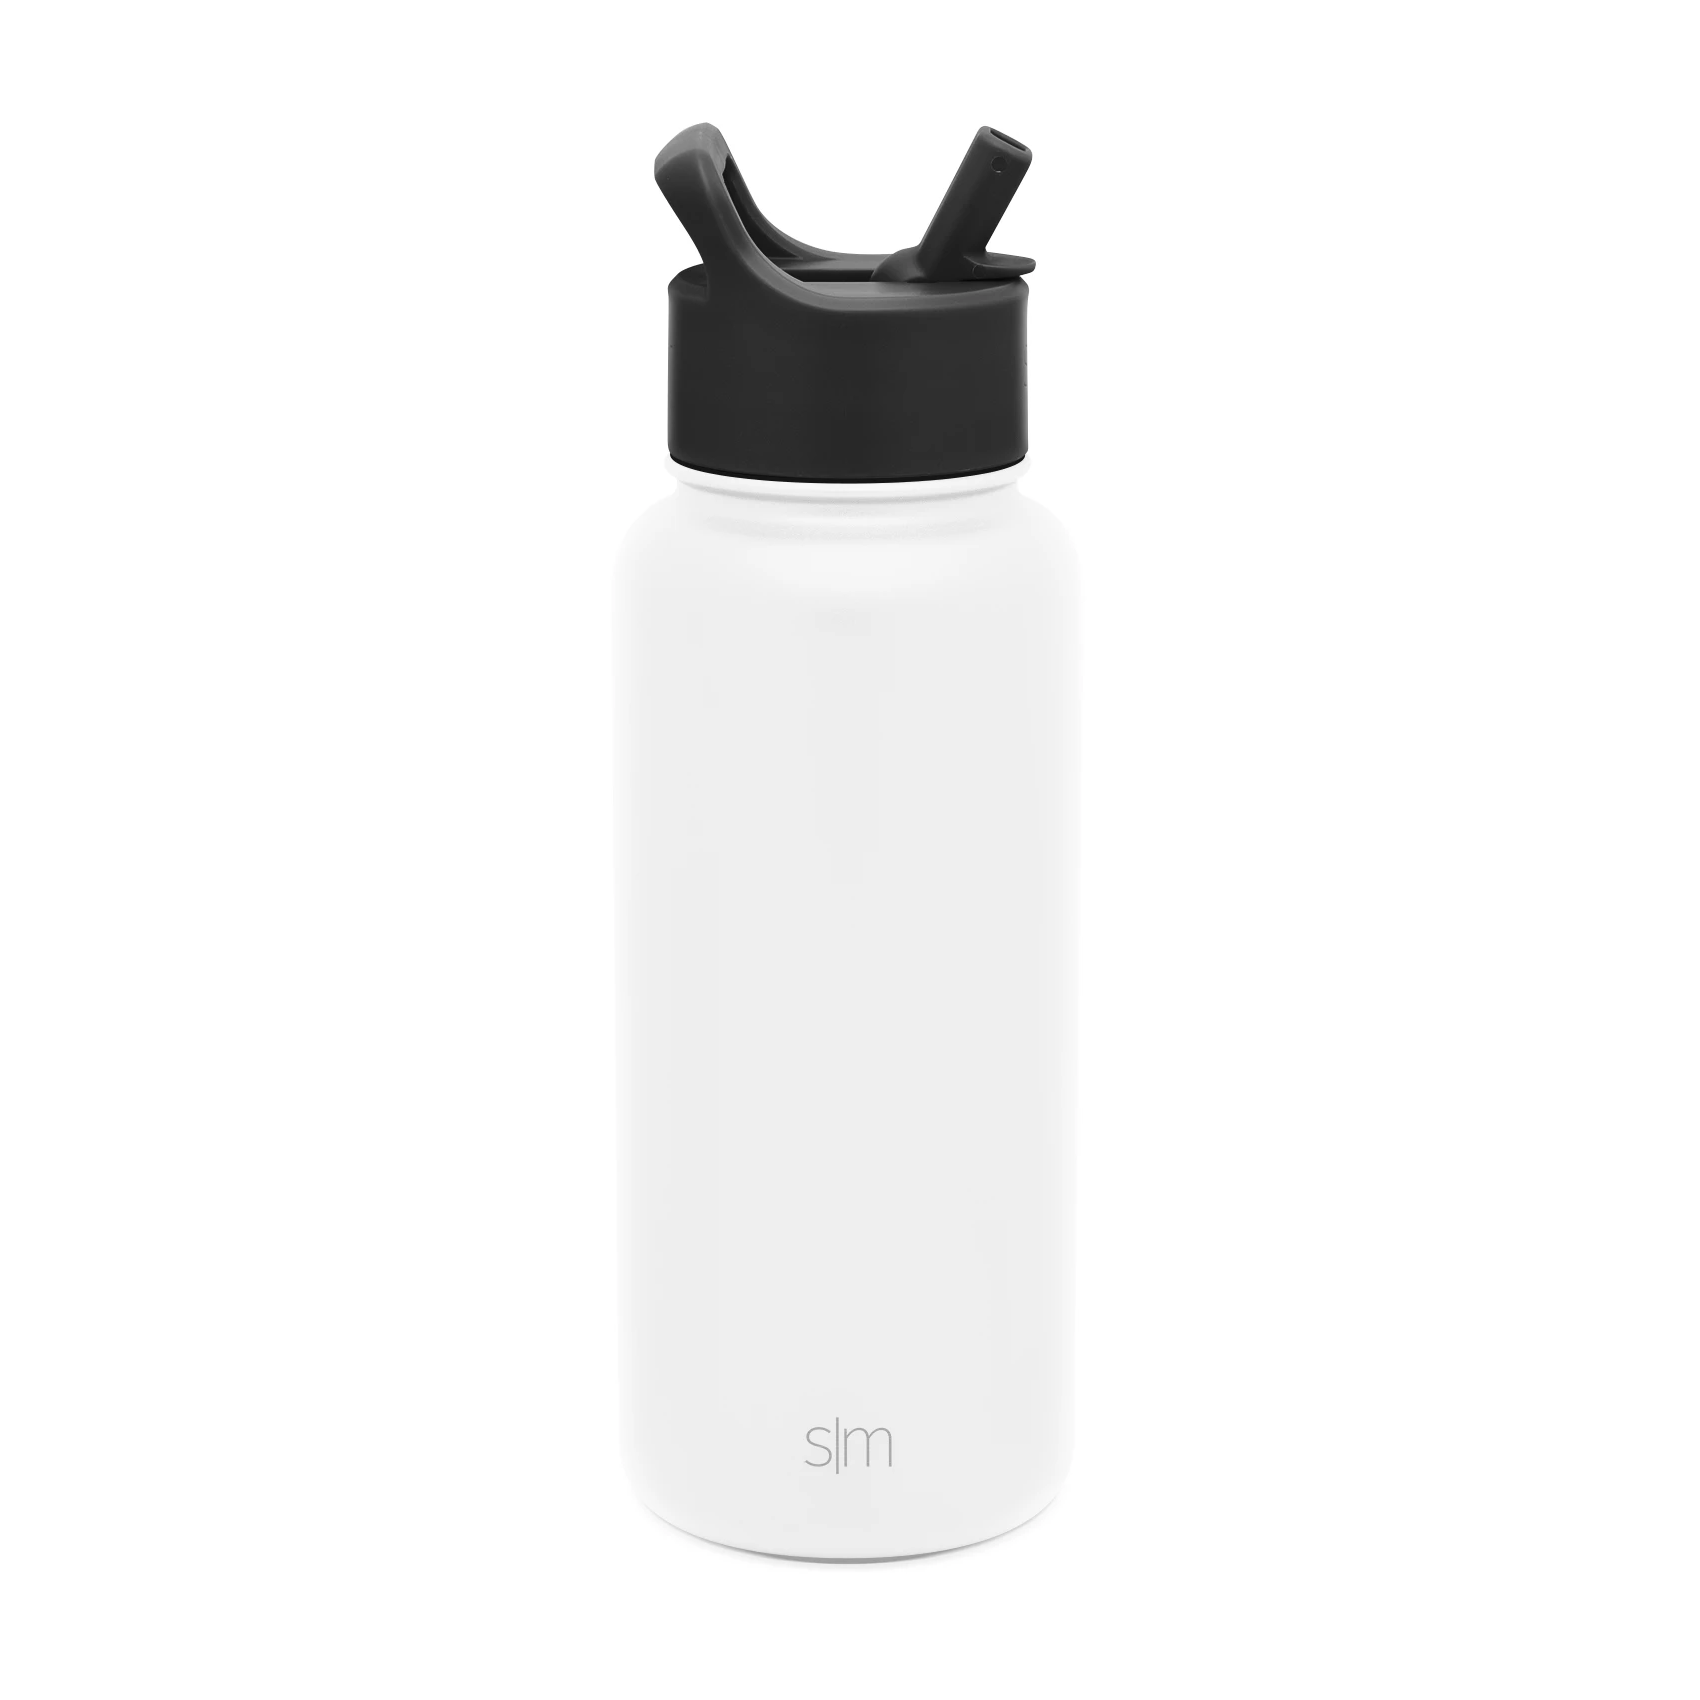 https://img.printfection.com/19/27399/fuqxmo0cEynv3mA/Simple+Modern+Summit+Water+Bottle+%2832+oz%29+-+Winter+White+%28Front%29.png